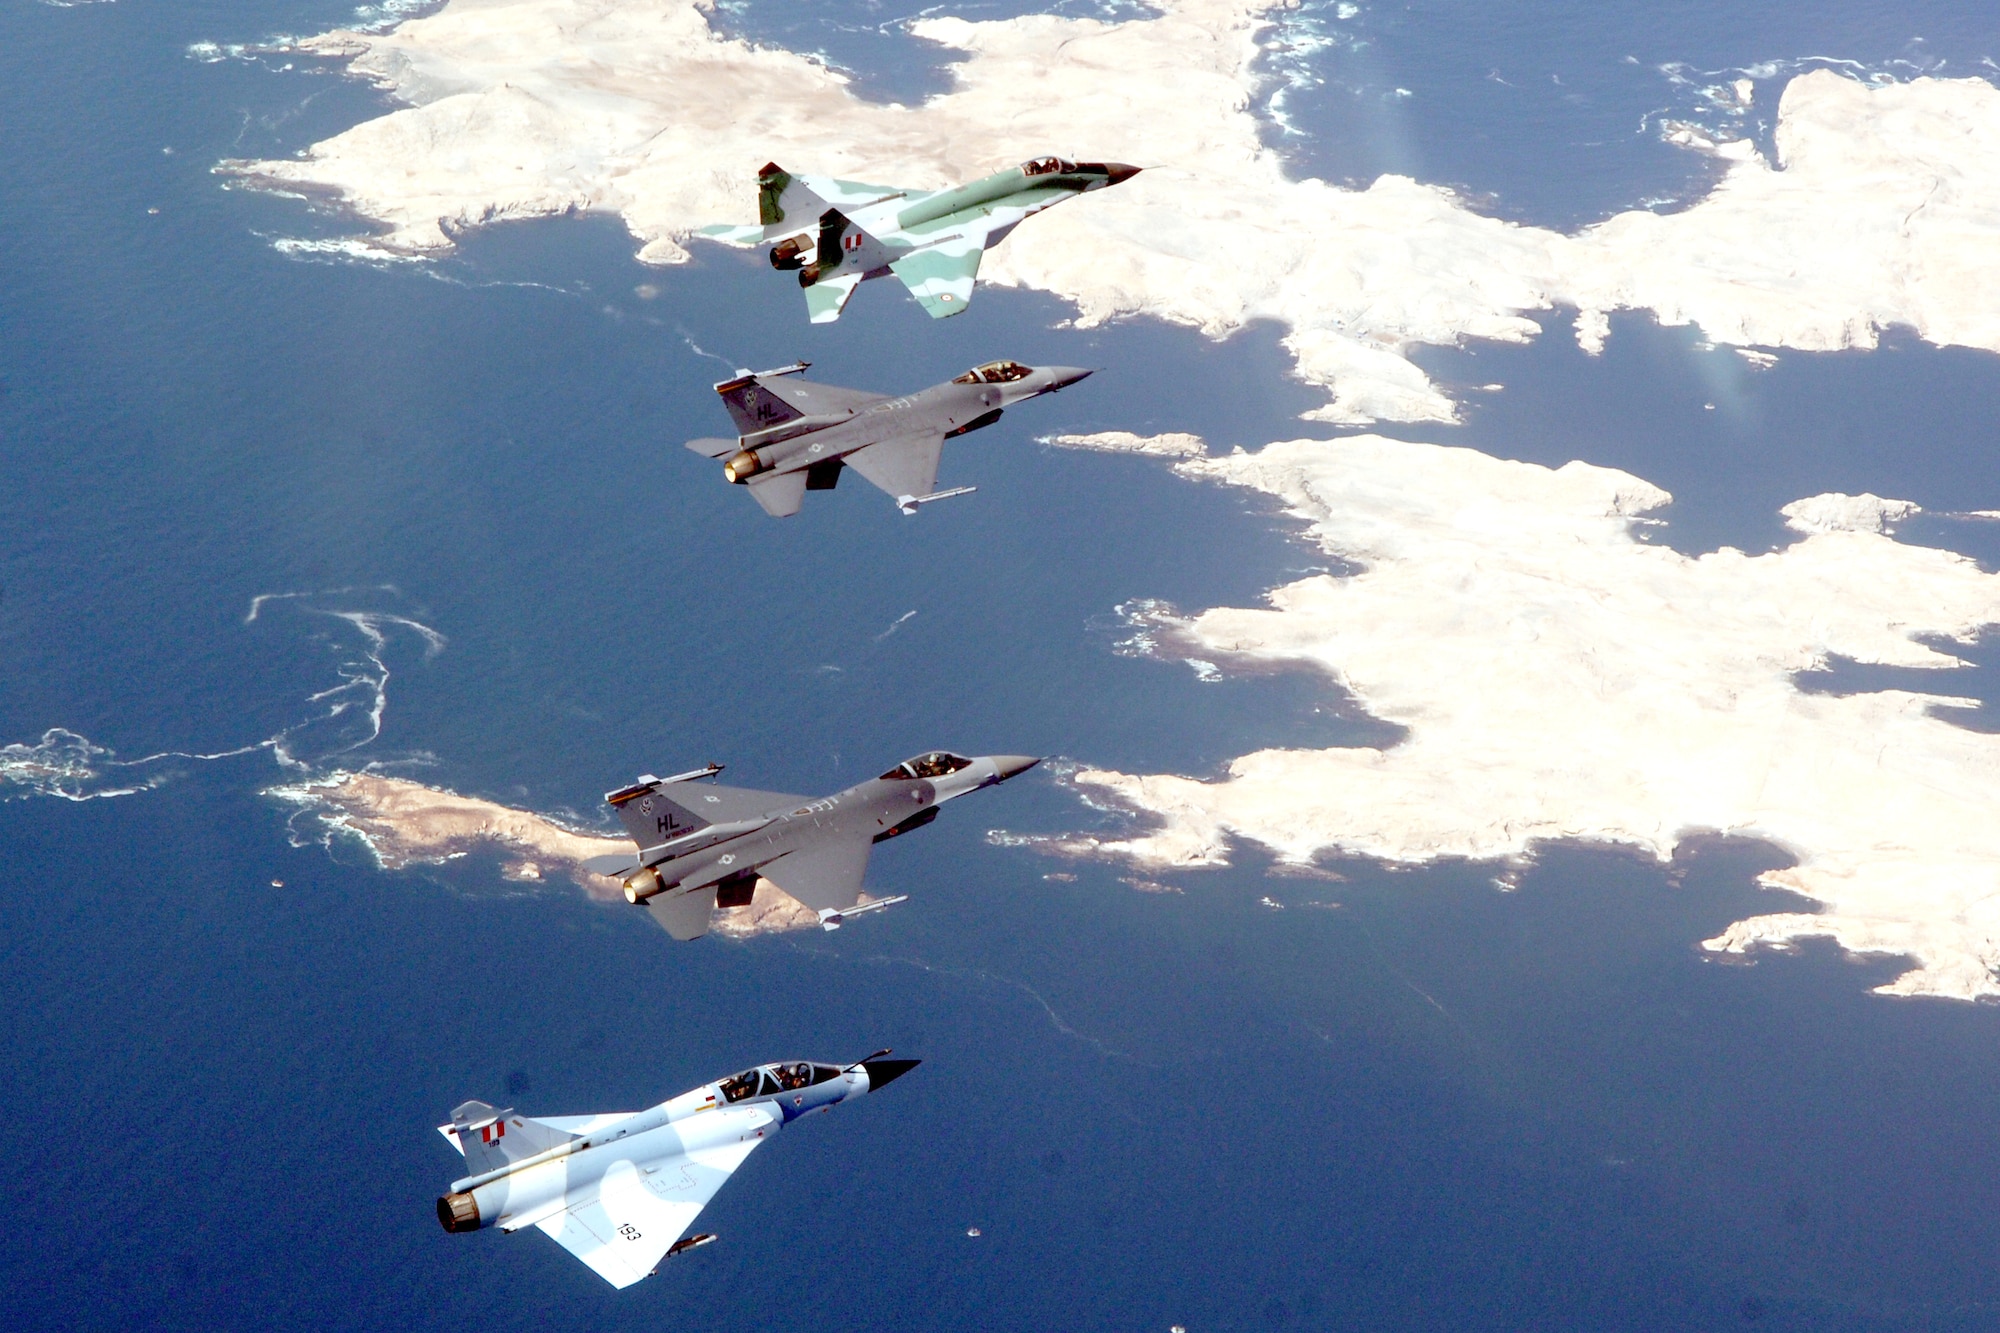 Two F-16 Fighting Falcons form up with a Peruvian MiG-29 and Mirage 2000 during dissimilar air combat training Feb. 15 as part of Falcon and Condor 2007, a joint exercise between the U.S. and Peruvian Air Forces. The exercise allows the U.S. military to build relationships with military and civilian leaders of Peru. The F-16s are from the 34th Fighter Squadron at Hill Air Force Base, Utah. (U.S. Air Force photo/Tech. Sgt. Eric Kreps)